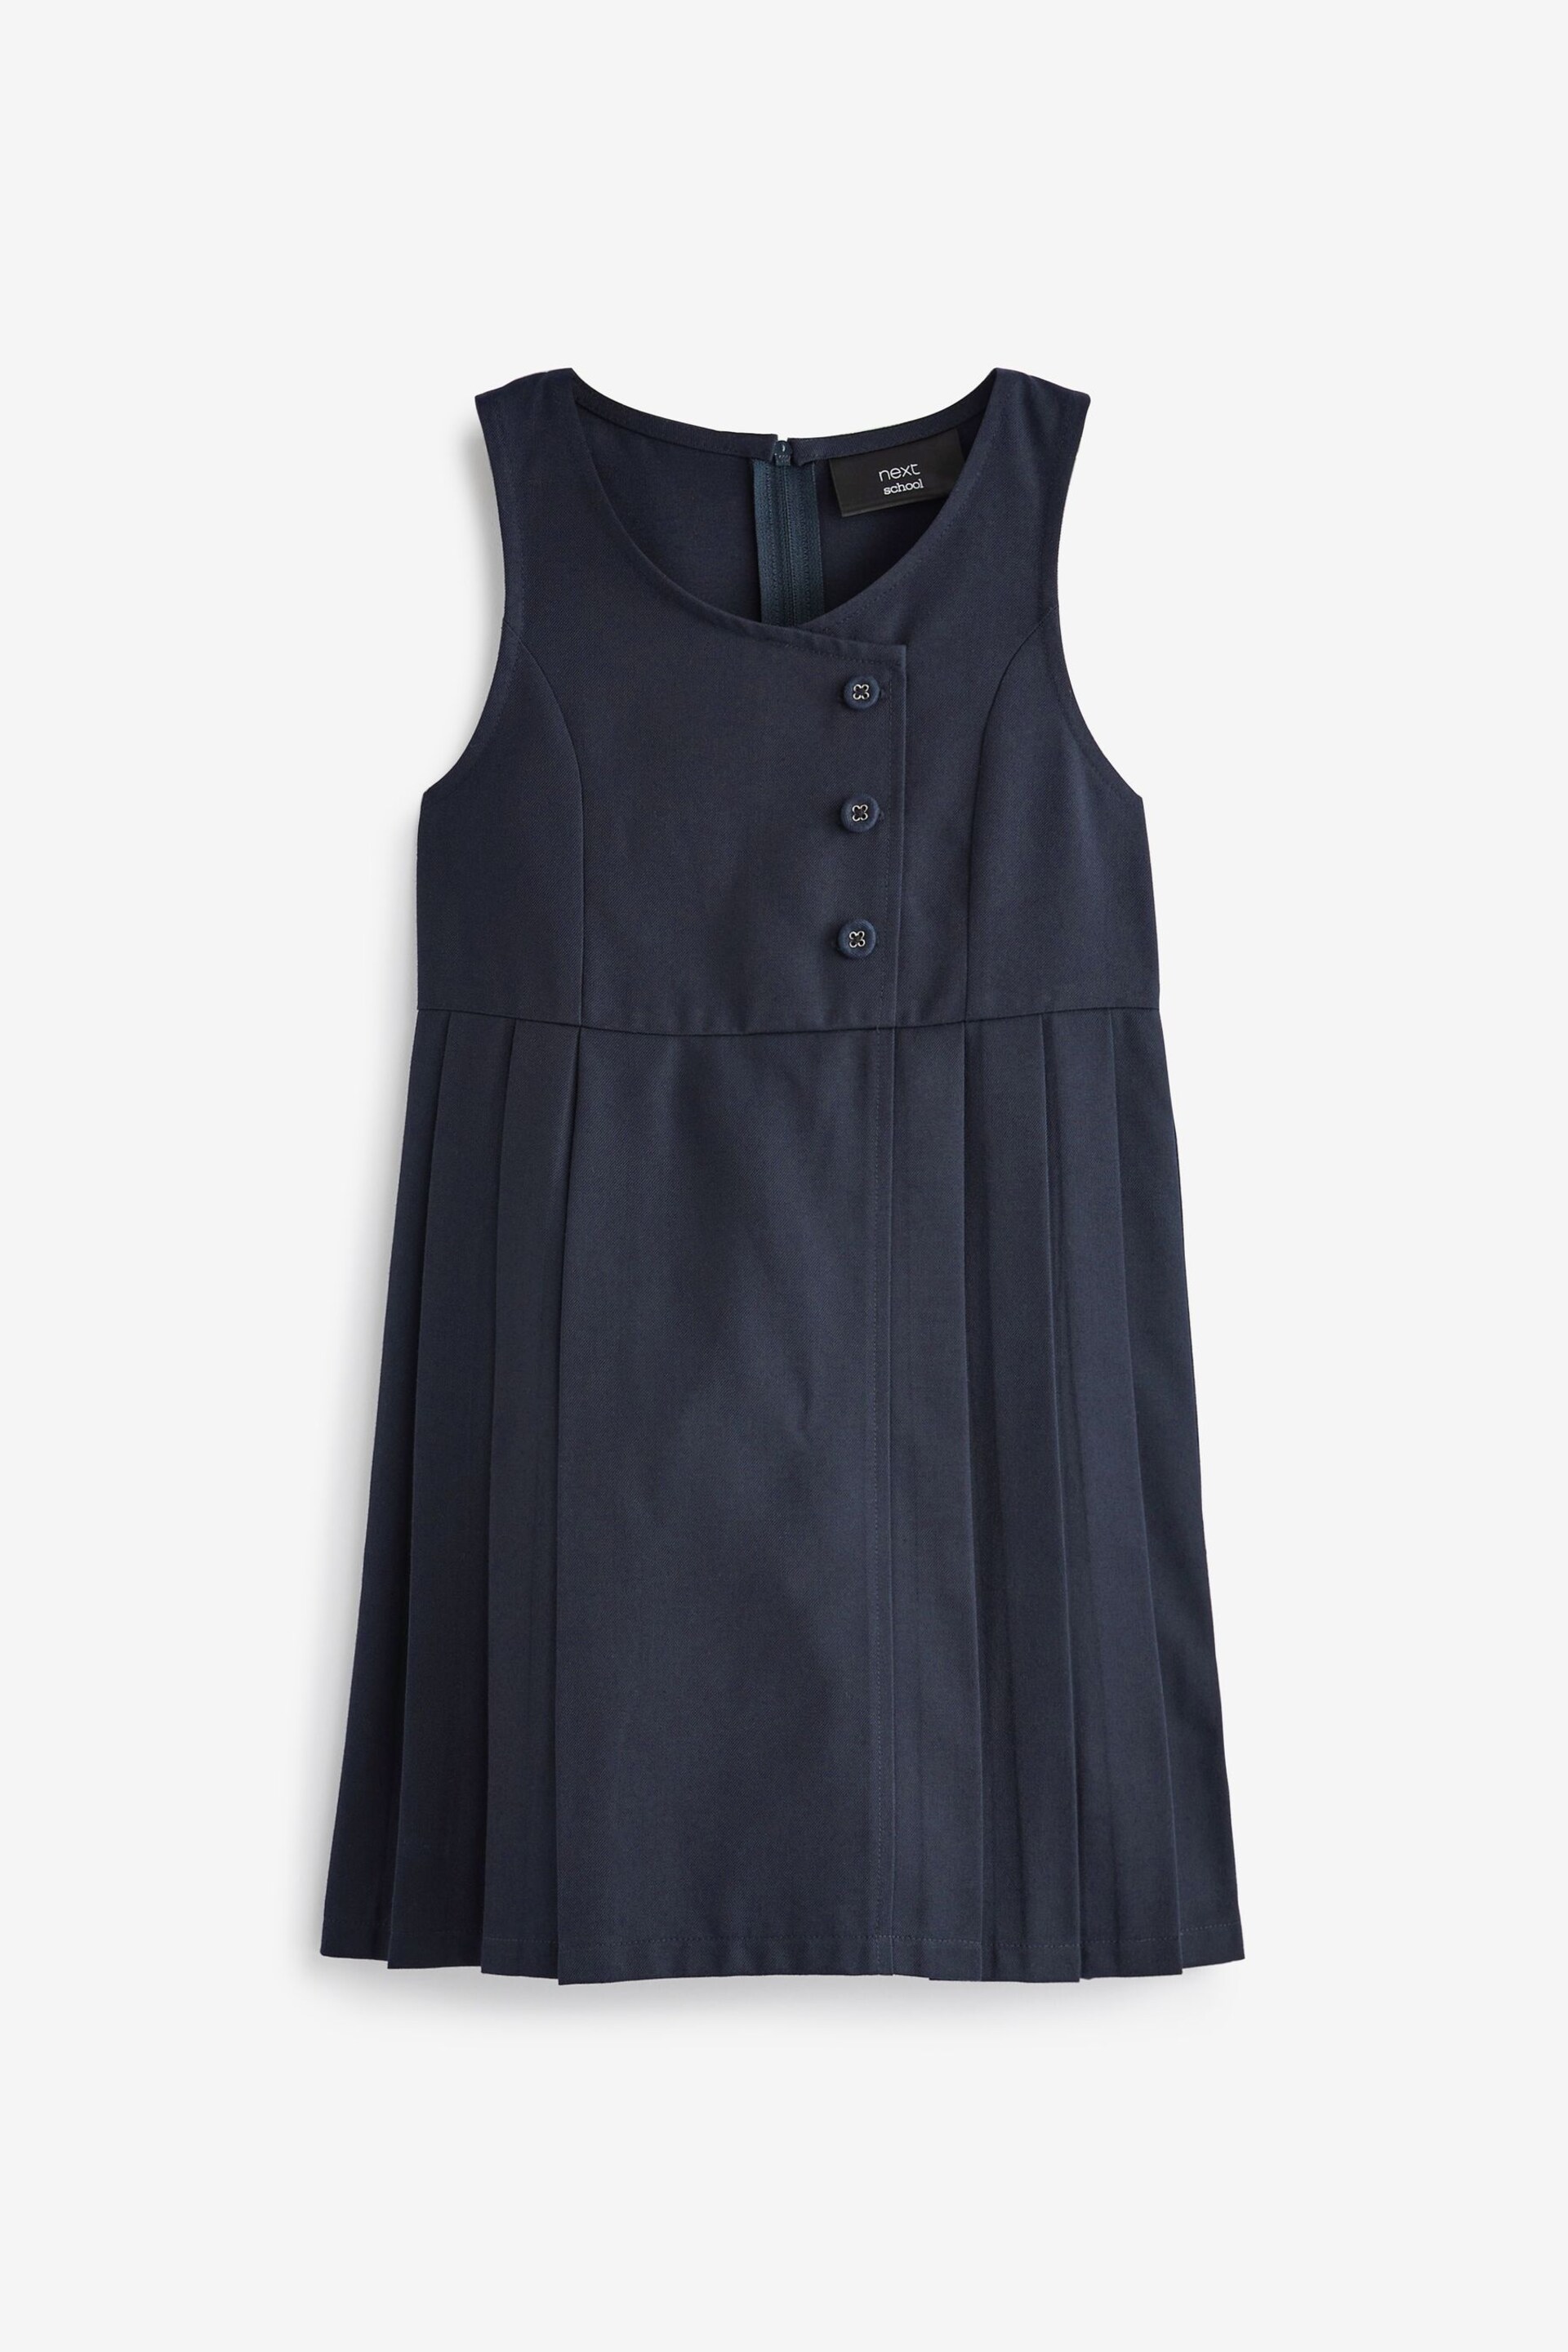 Navy Blue Asymmetric Button Front Pinafore School Dress (3-14yrs) - Image 5 of 6